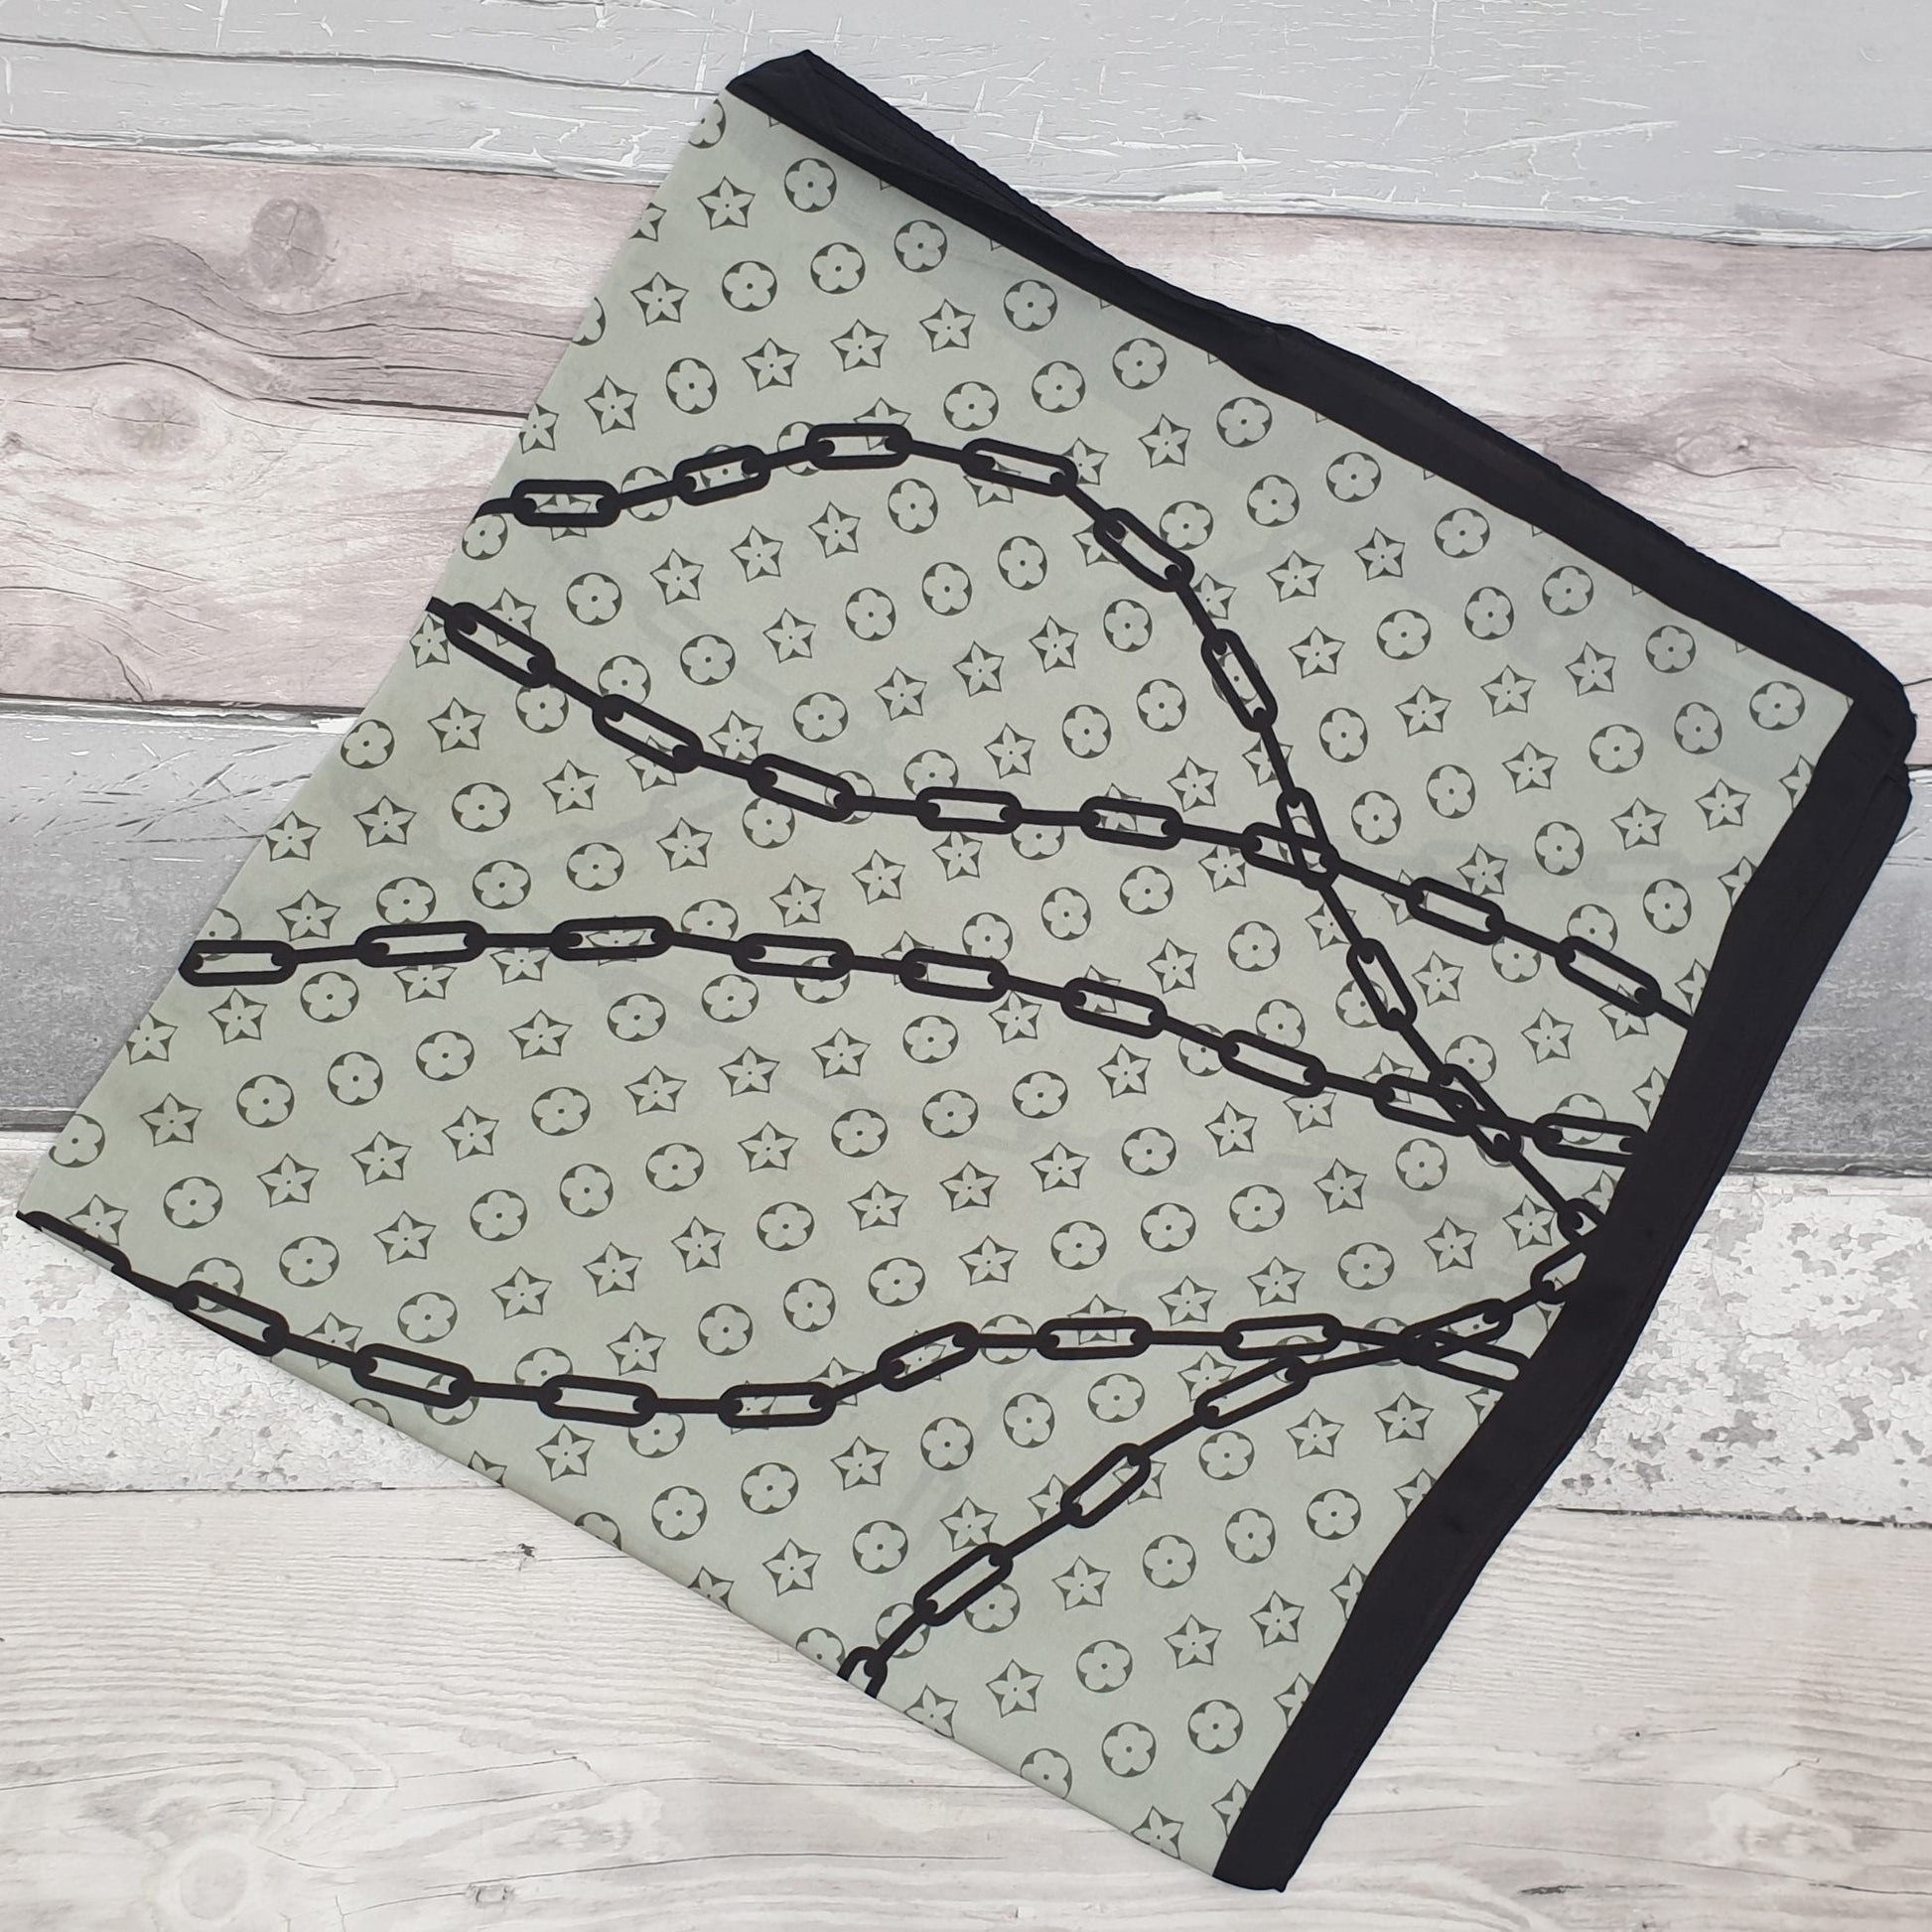 Pale green scarf with solid black trim, decorated with swirls of black chains.